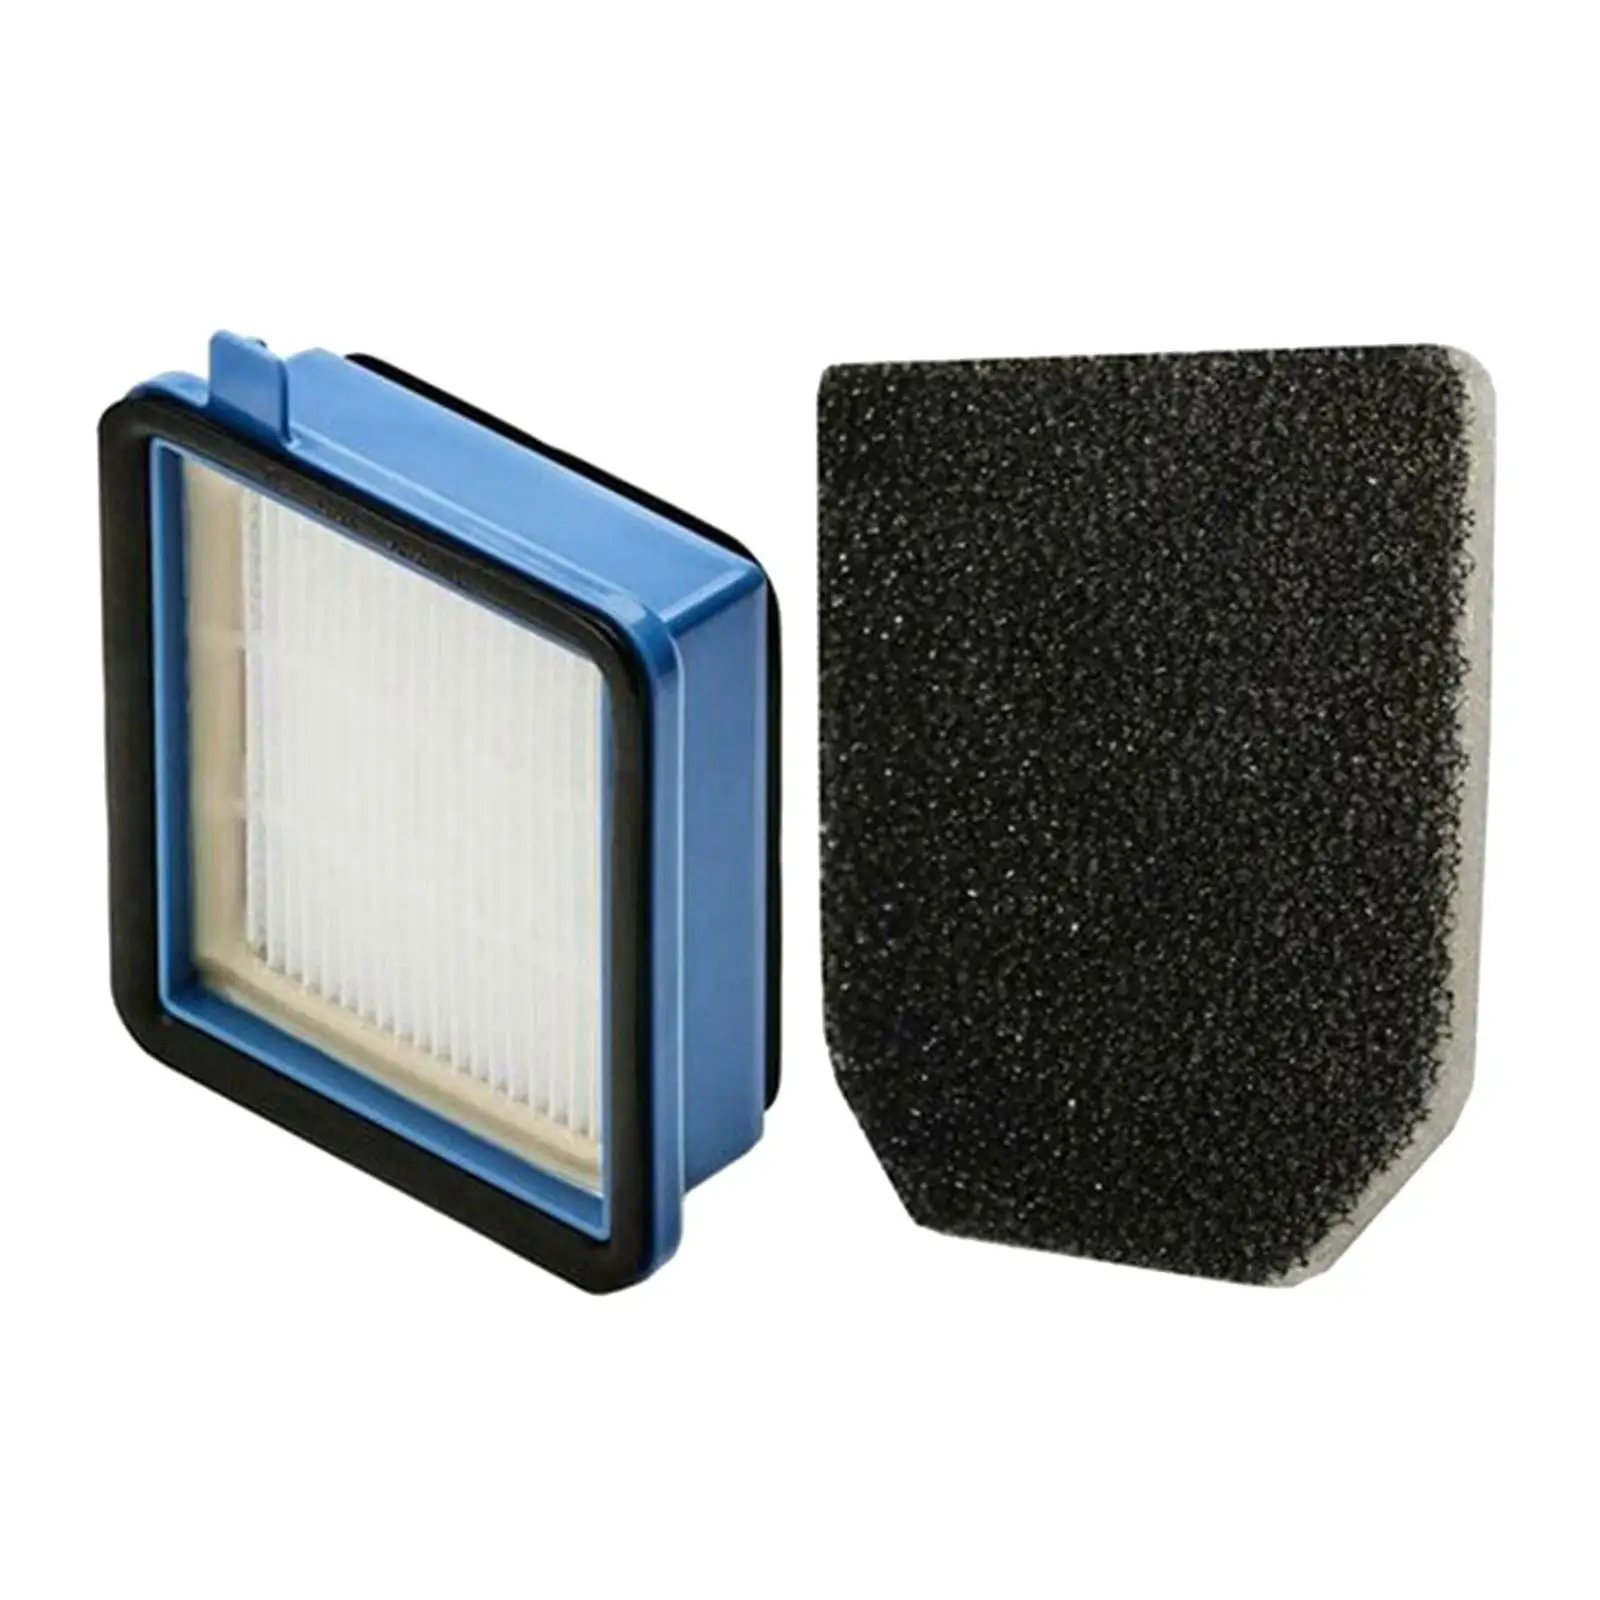 Household Vacuum Cleaner Filters Replace Parts Accessories Professional for QX7 QX6 Vaccums